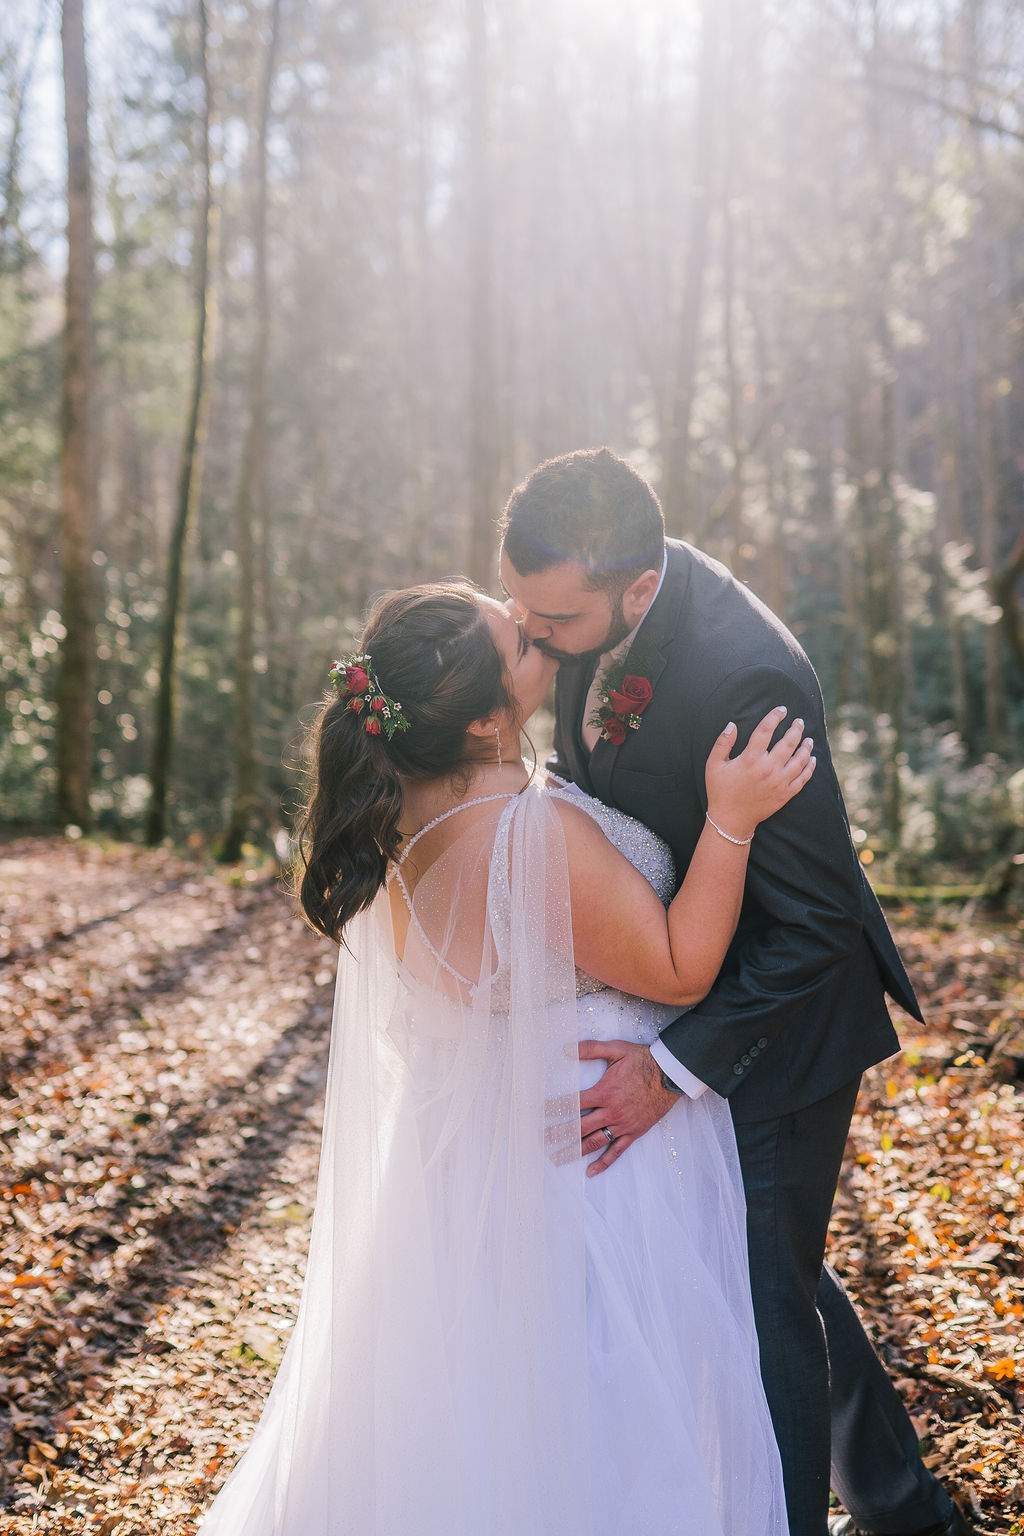 smoky mountain wedding photographer captures bride and groom kissing passionately in the woods as the sun shines down on them